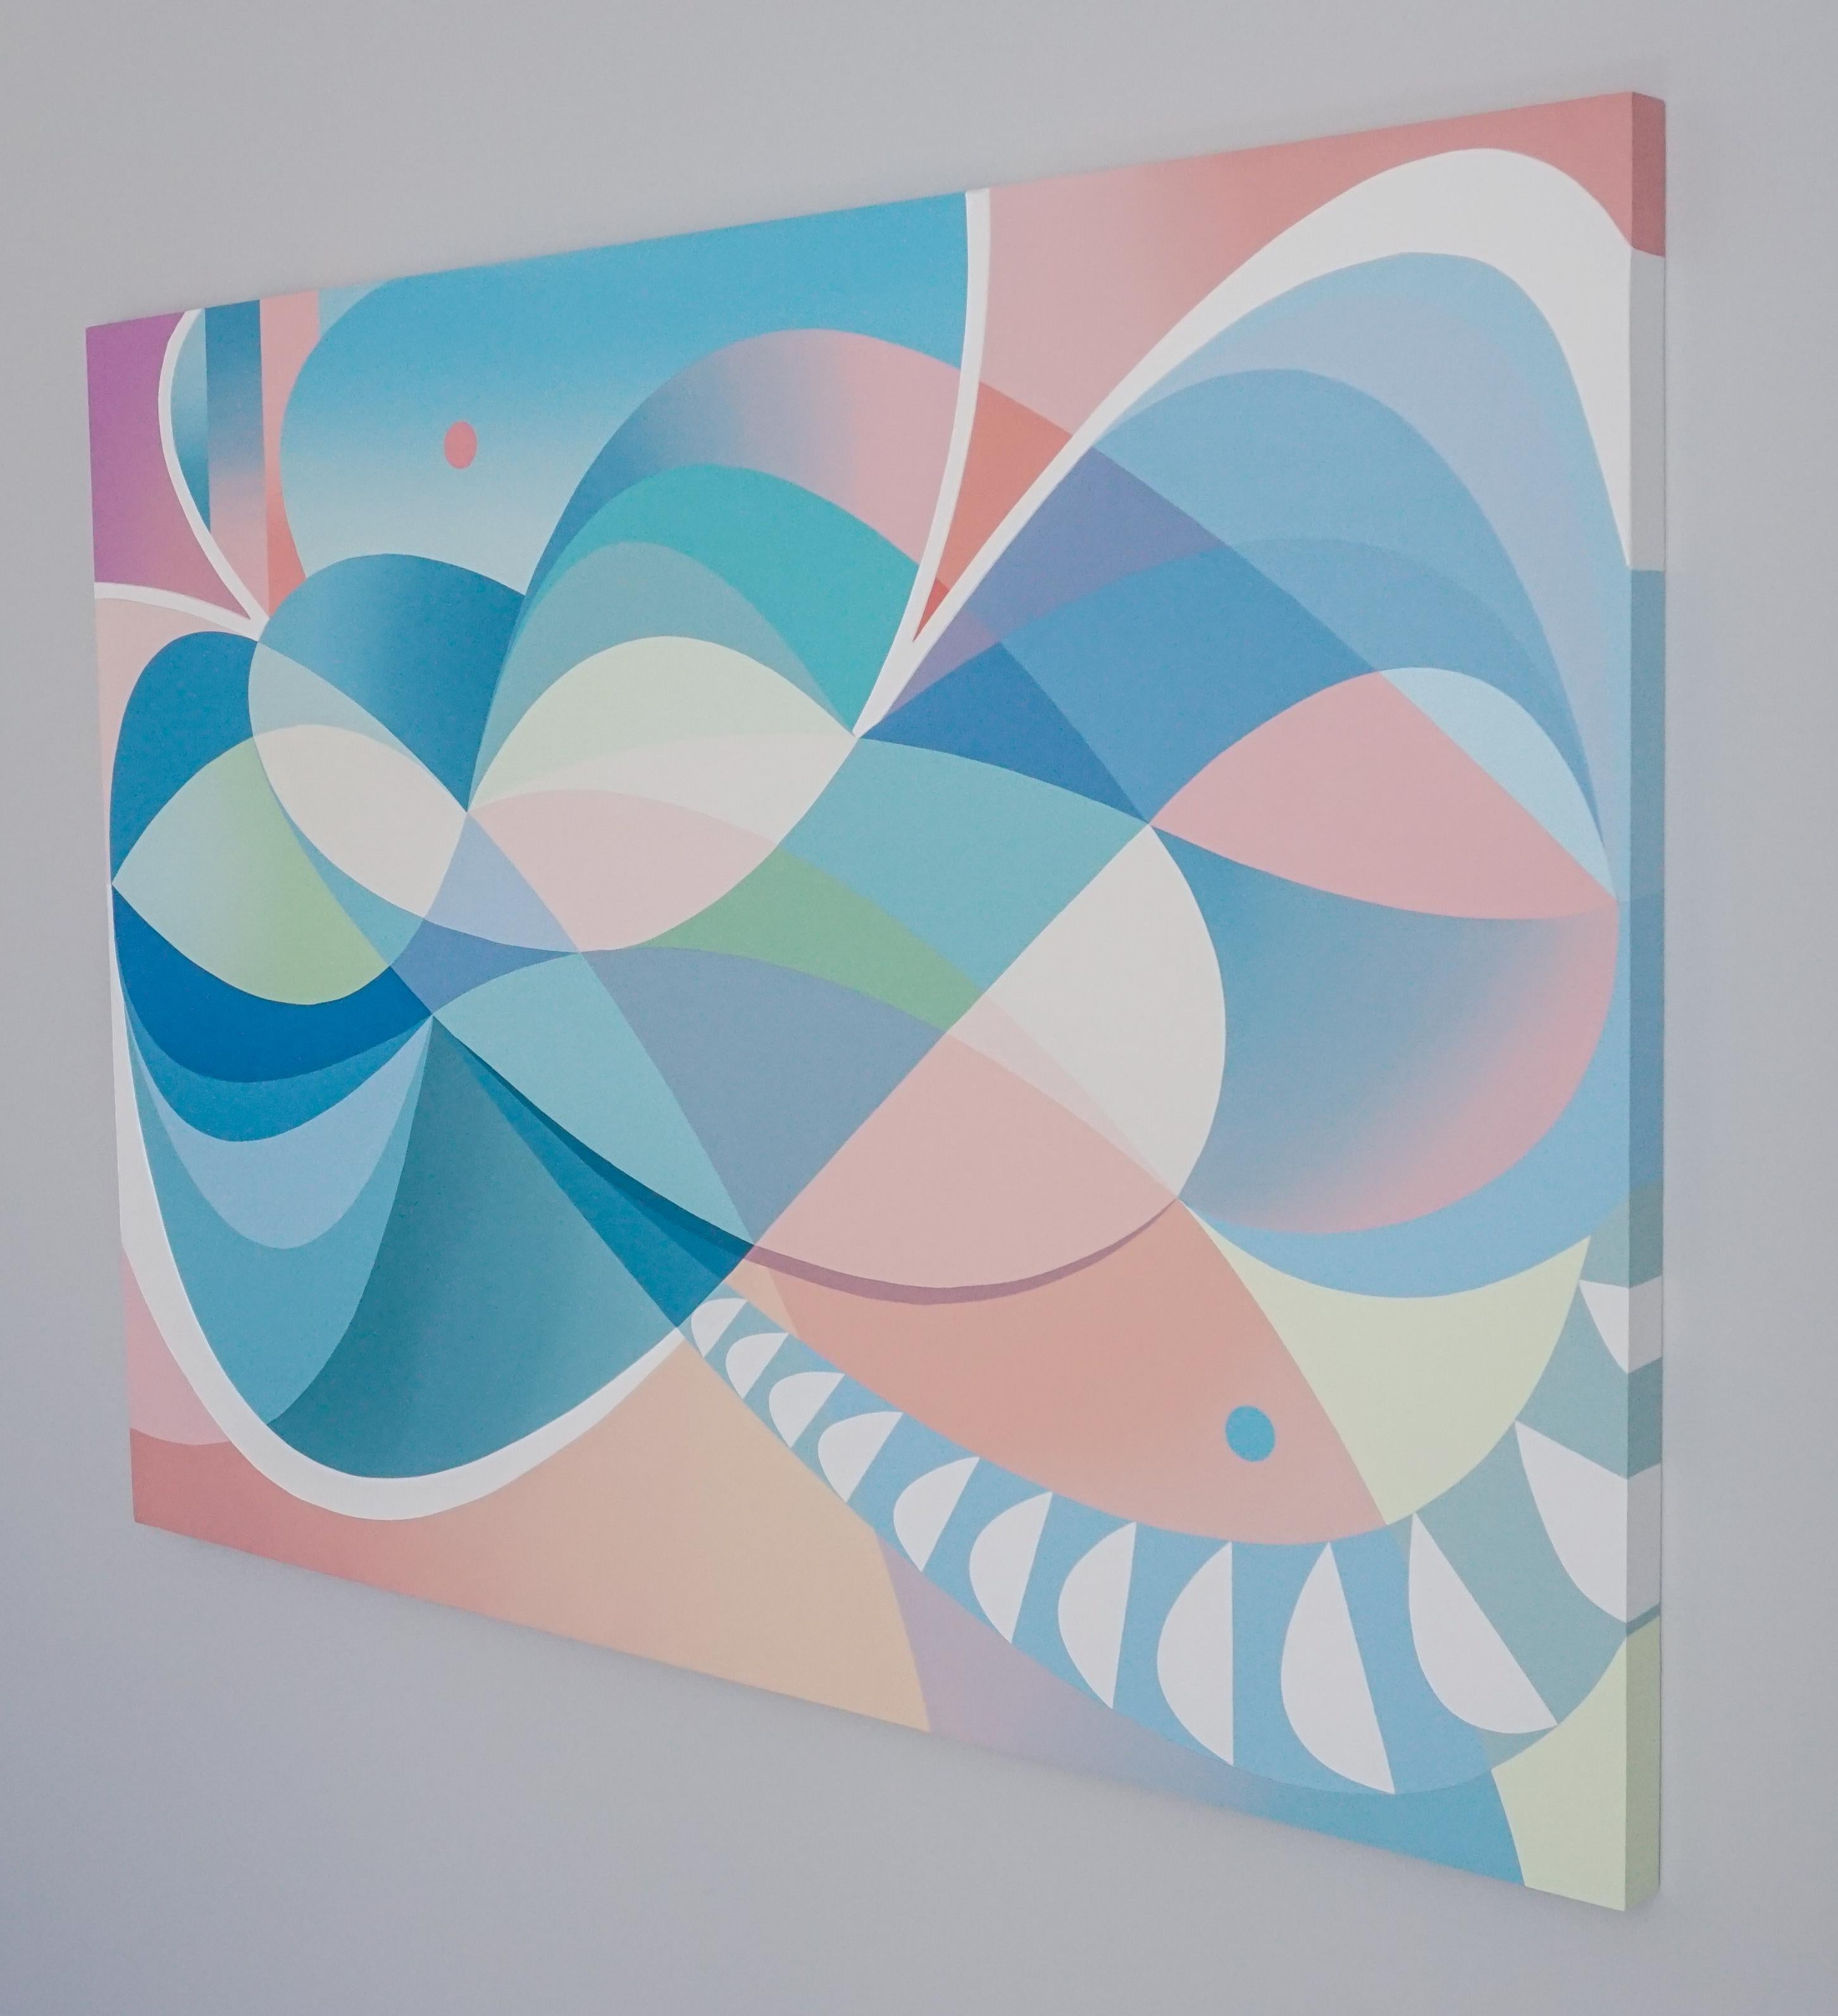 In this work, Michelle Weddle utilizes line, color, and form to create a painting which acts at the balance between the nonobjective and the representational. Using pastel pinks and blues in a looping, organic (though flat) pattern, she is able to